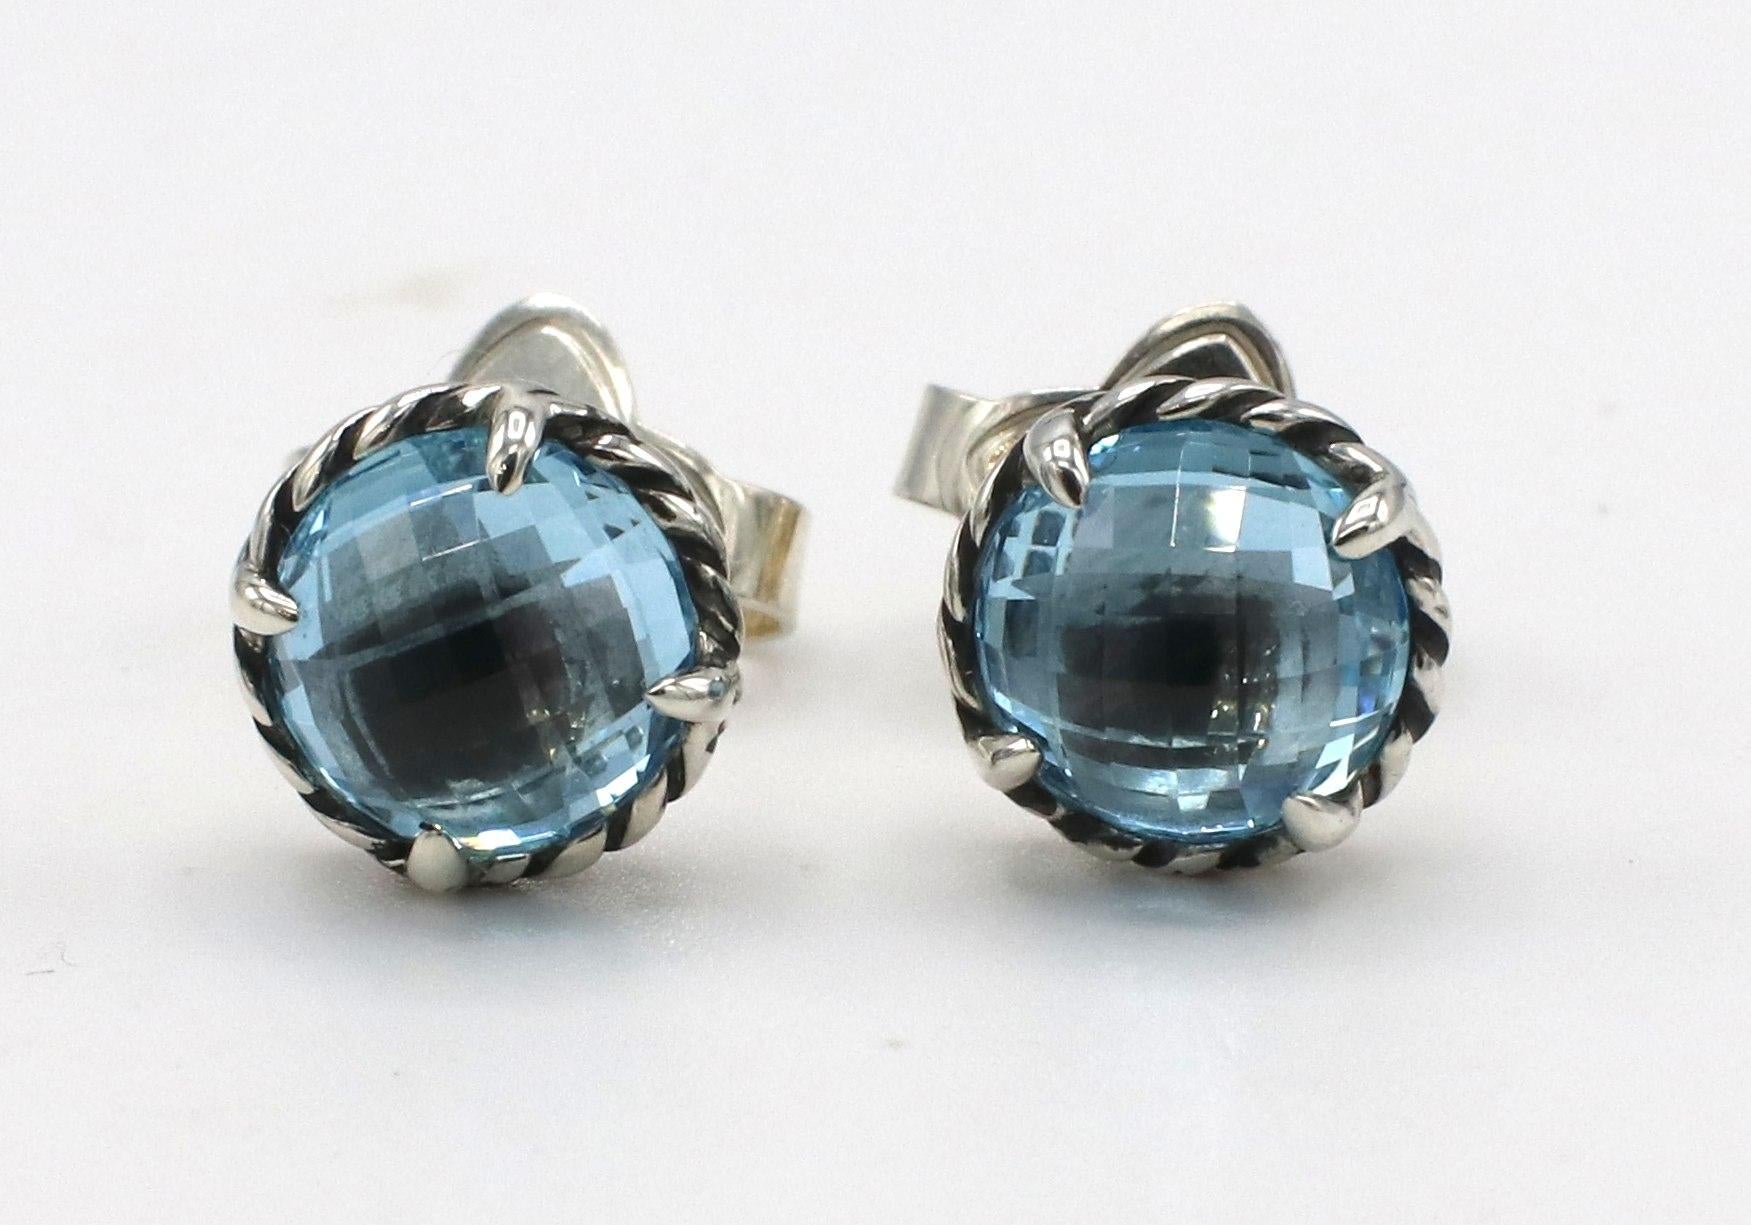 David Yurman Chatelaine Sterling Silver & Blue Topaz Stud Earrings 
Metal: Sterling silver 925, posts are white gold 
Weight: 3.48 grams
Diameter: 9.3mm
Stone: Blue topaz, 8mm
Retail: $425 USD

